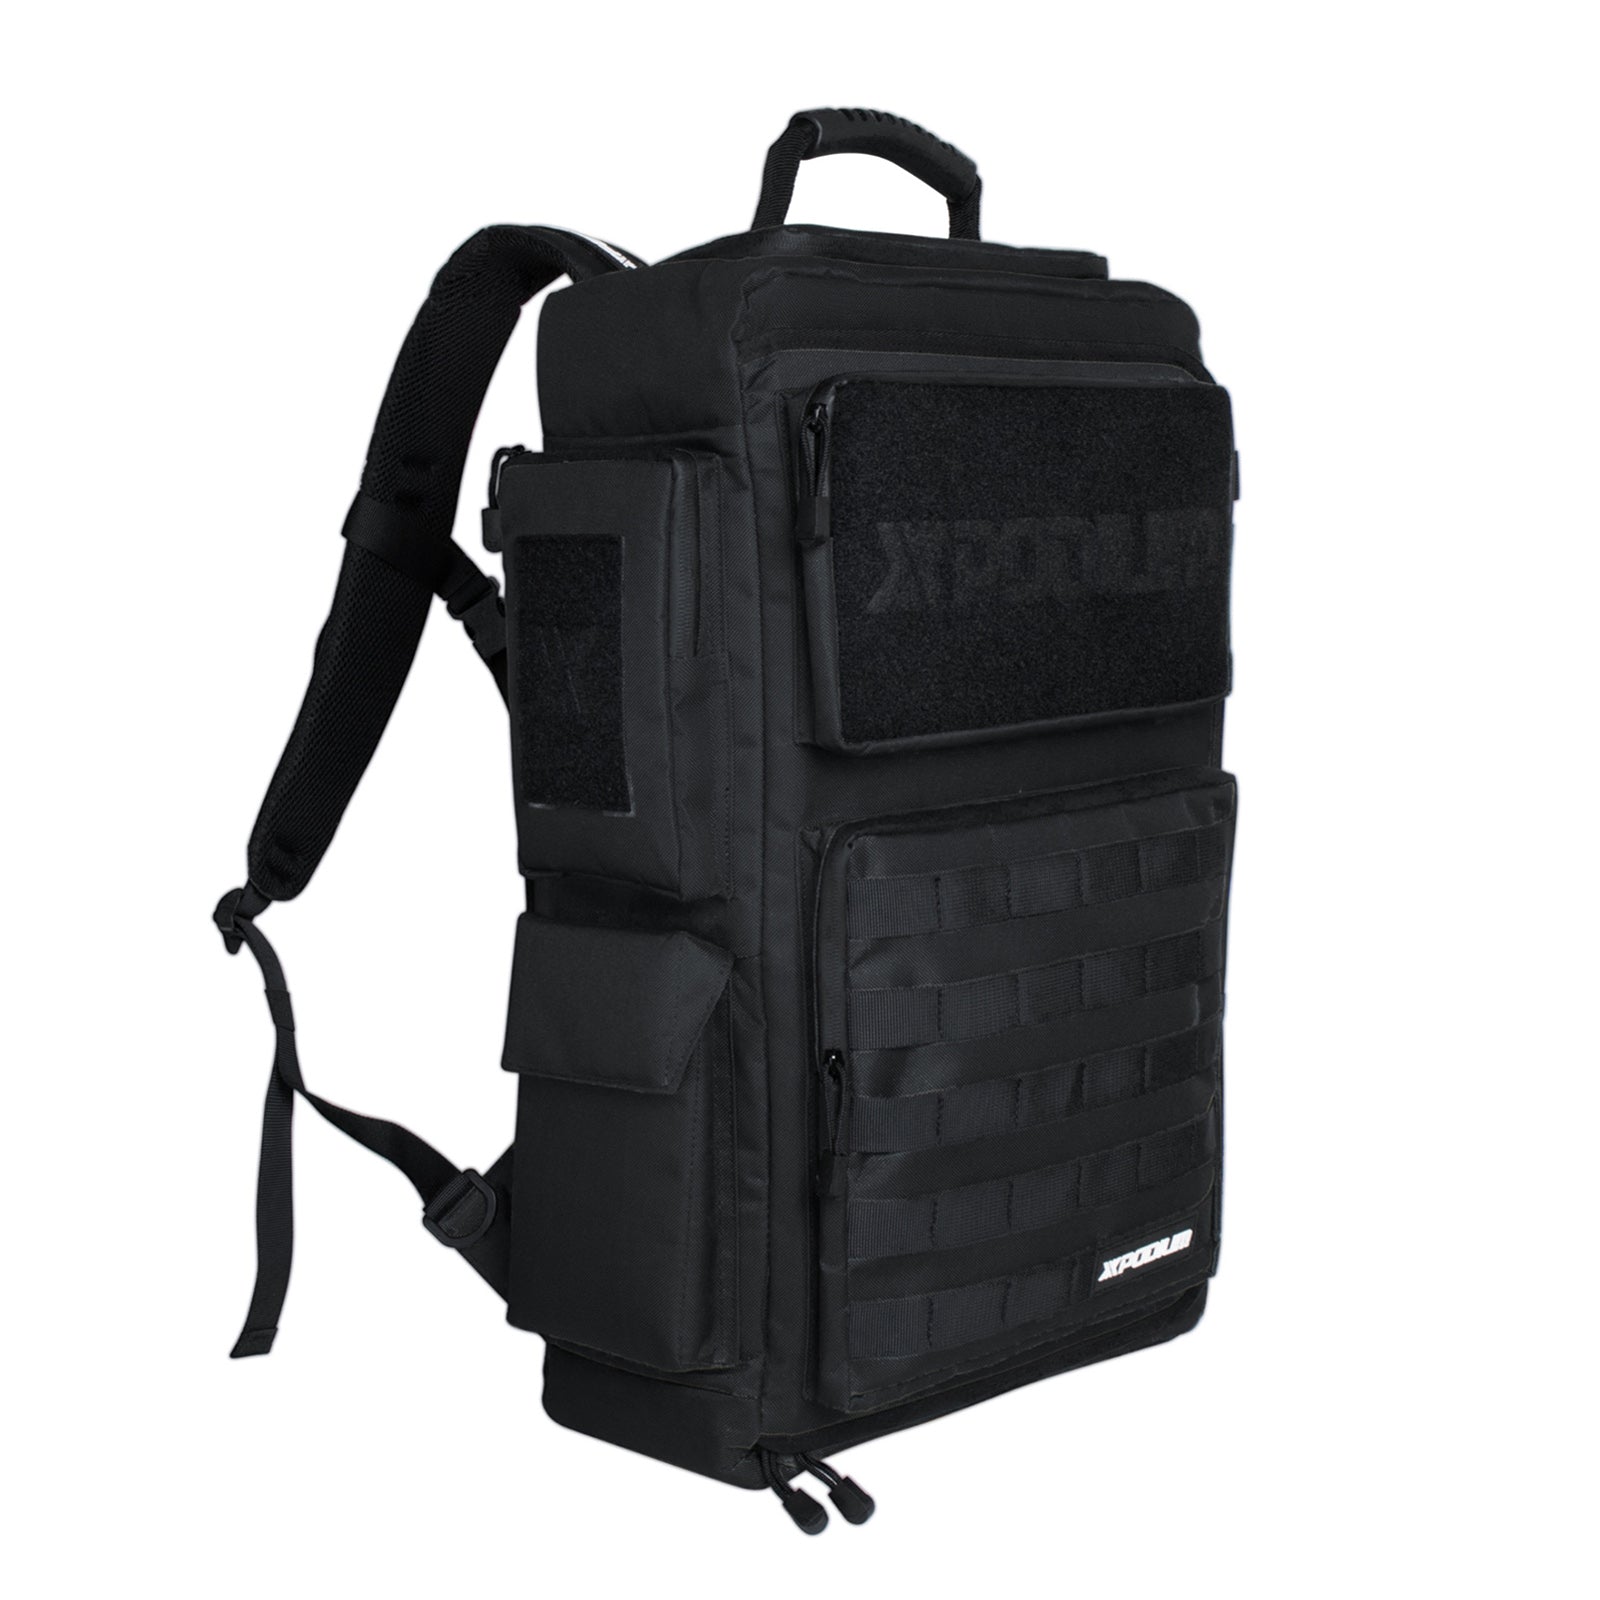 XPODIUM Gym Backpack for your sporting events - XPODIUM